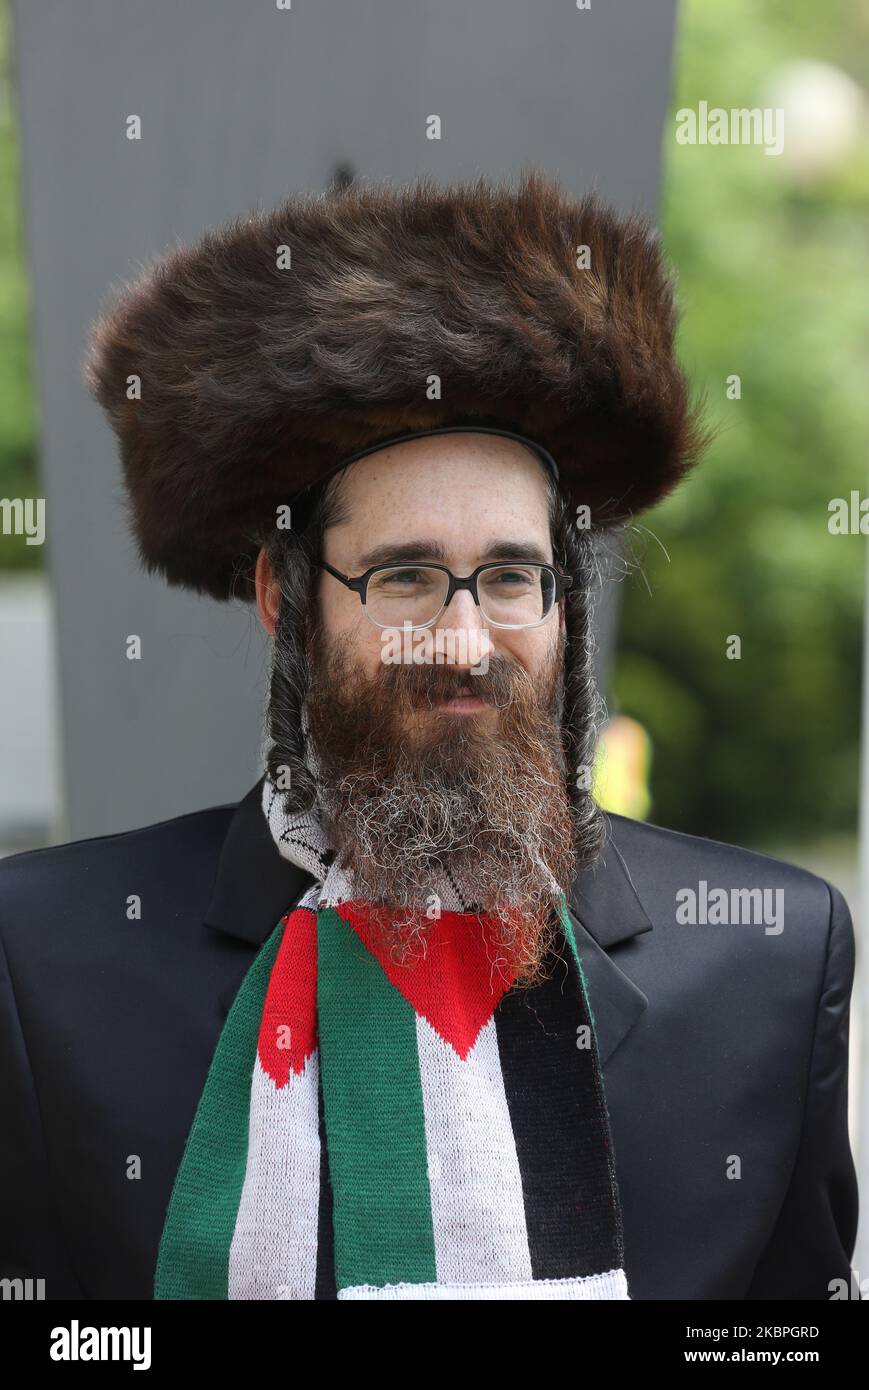 Ultra-Orthodox Jewish rabbi wearing a scarf with the Palestinian flag as he protests against Israel during the Al Quds Day (Al-Quds Day) rally outside the U.S. consulate in Toronto, Ontario, Canada on May 01, 2019. Al Quds Day rallies took place in over 800 cities around the world to denounce the continued occupation of Palestine by Israel. 'Al Quds' is the Arabic name for Jerusalem, it is an annual event held on the last Friday of Ramadan that was initiated by the Islamic Republic of Iran in 1979 to express support for the Palestinians and oppose Zionism and Israel. (Photo by Creative Touch I Stock Photo